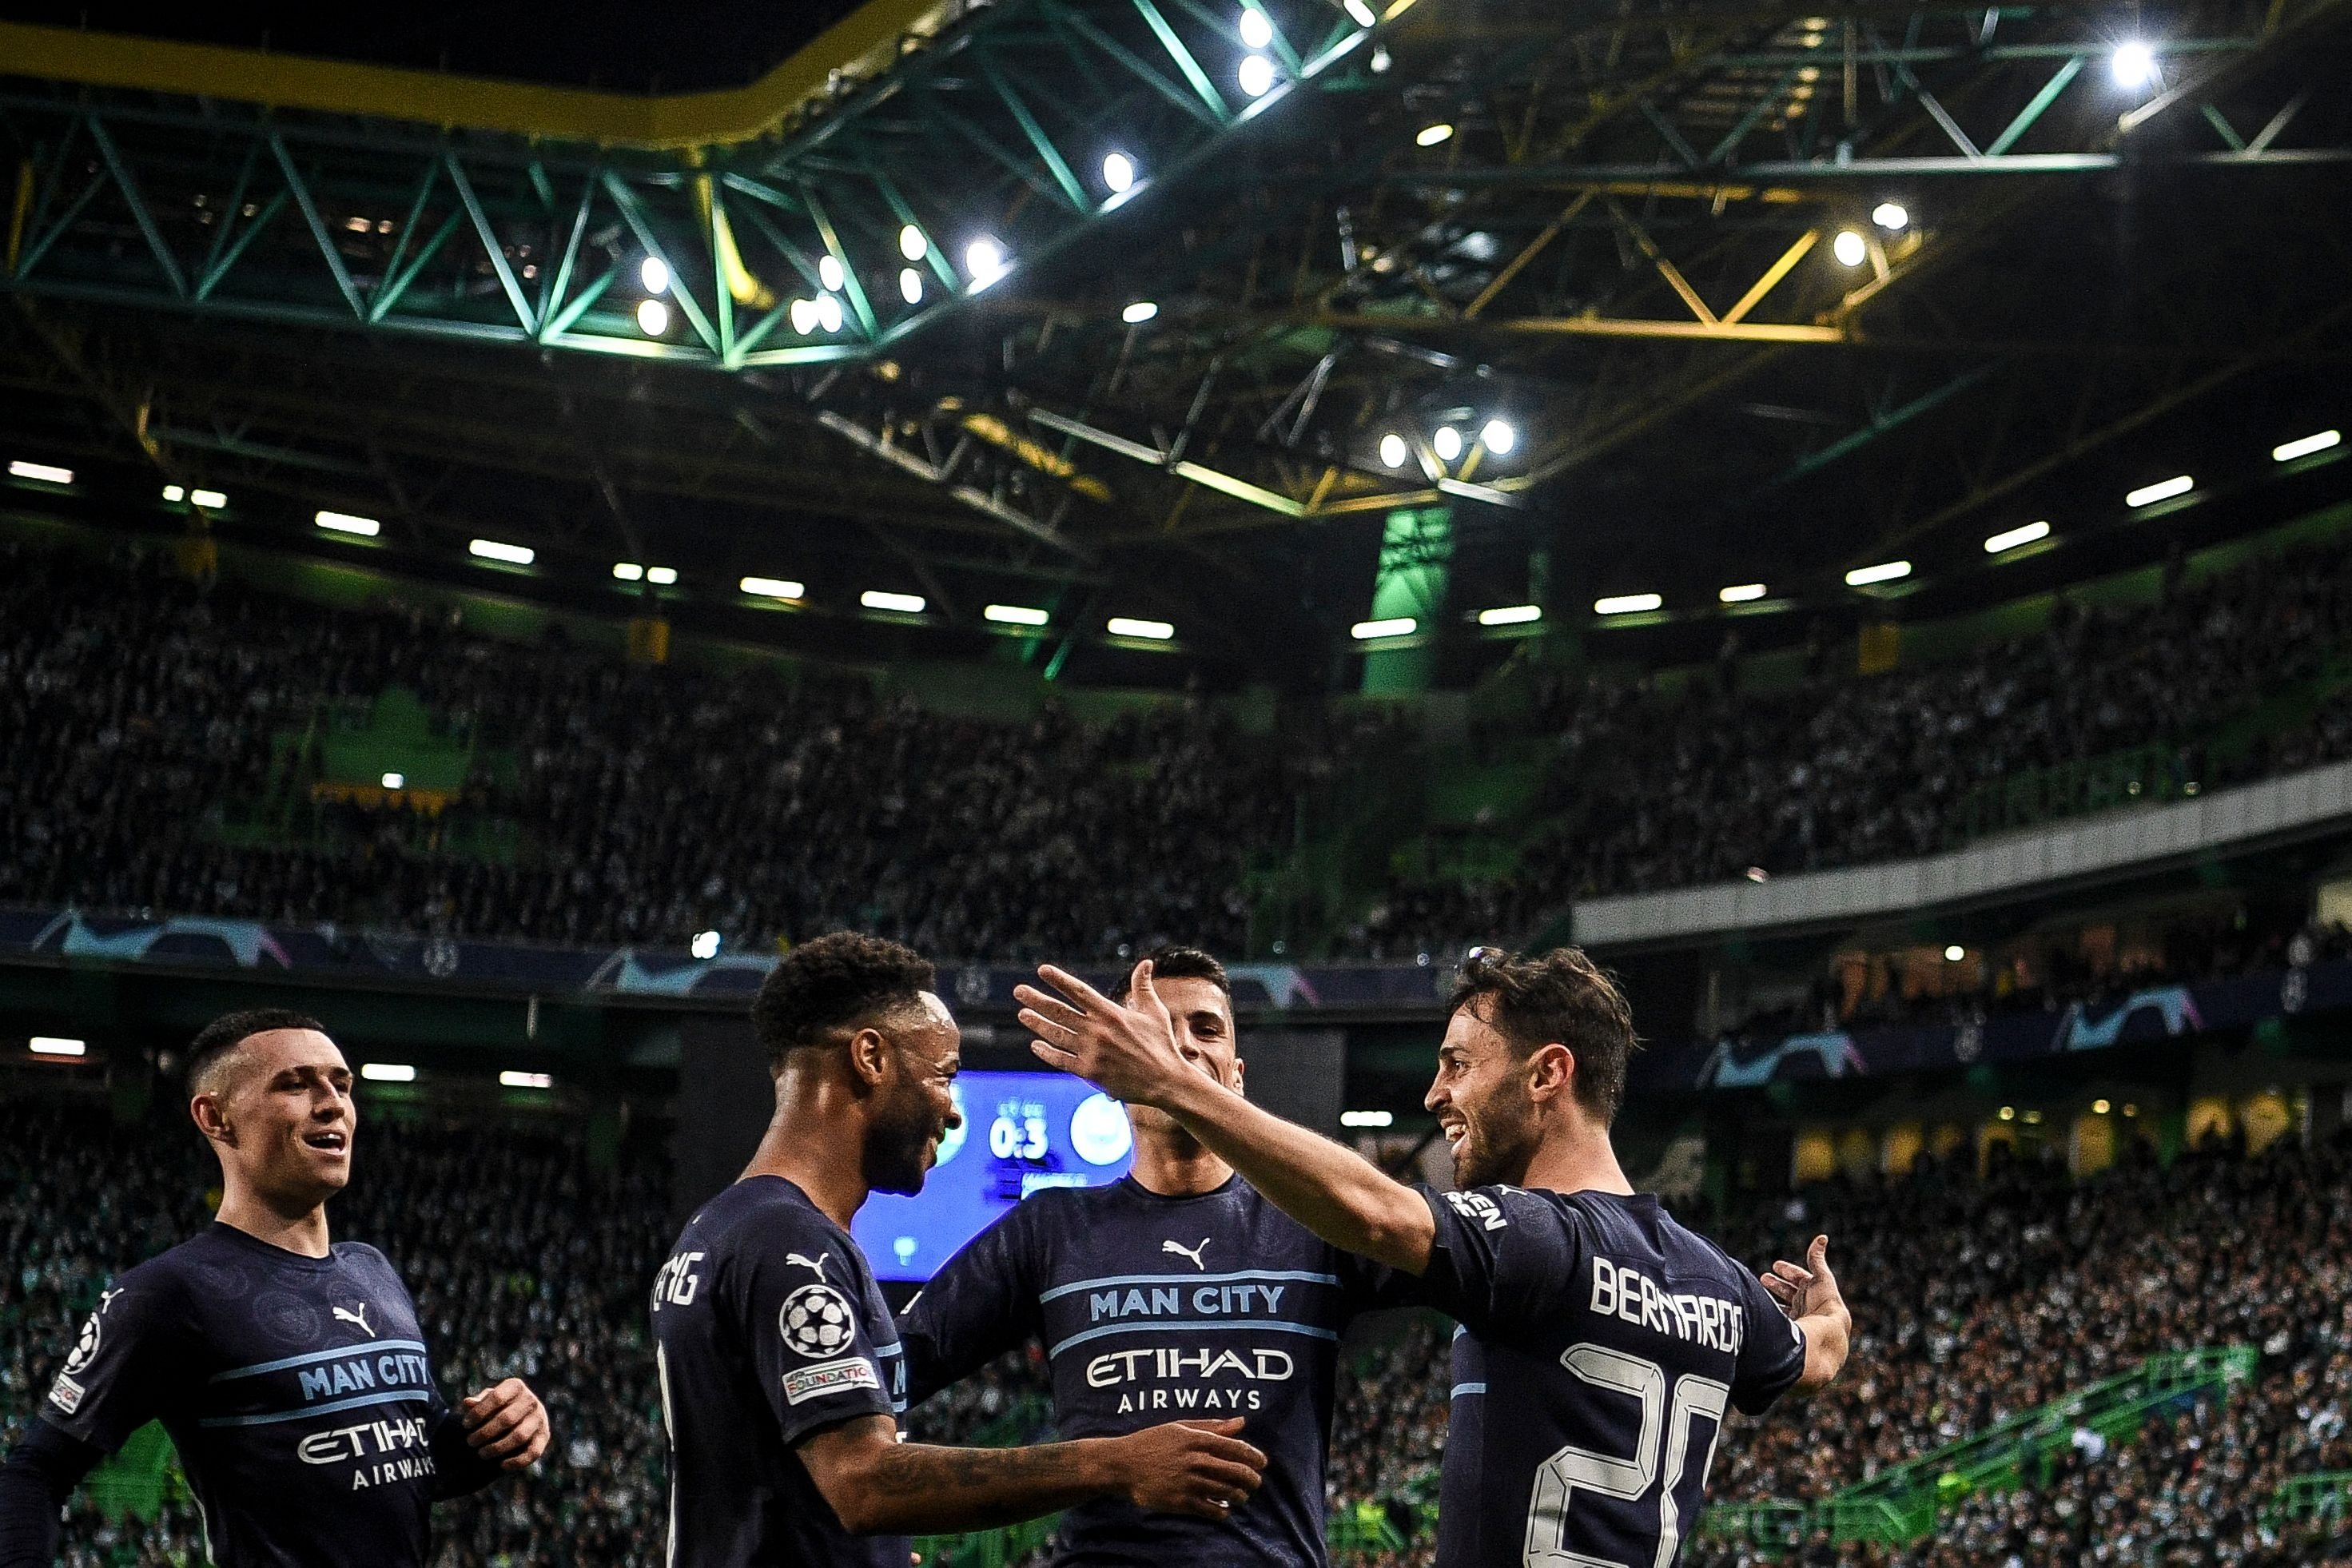 Manchester City's Portuguese midfielder Bernardo Silva (R) celebrates with teammates after scoring his team's fourth goal during the Champions League round of 16 match against Sporting CP, Lisbon, Portugal, Feb. 15, 2022. (AFP Photo)